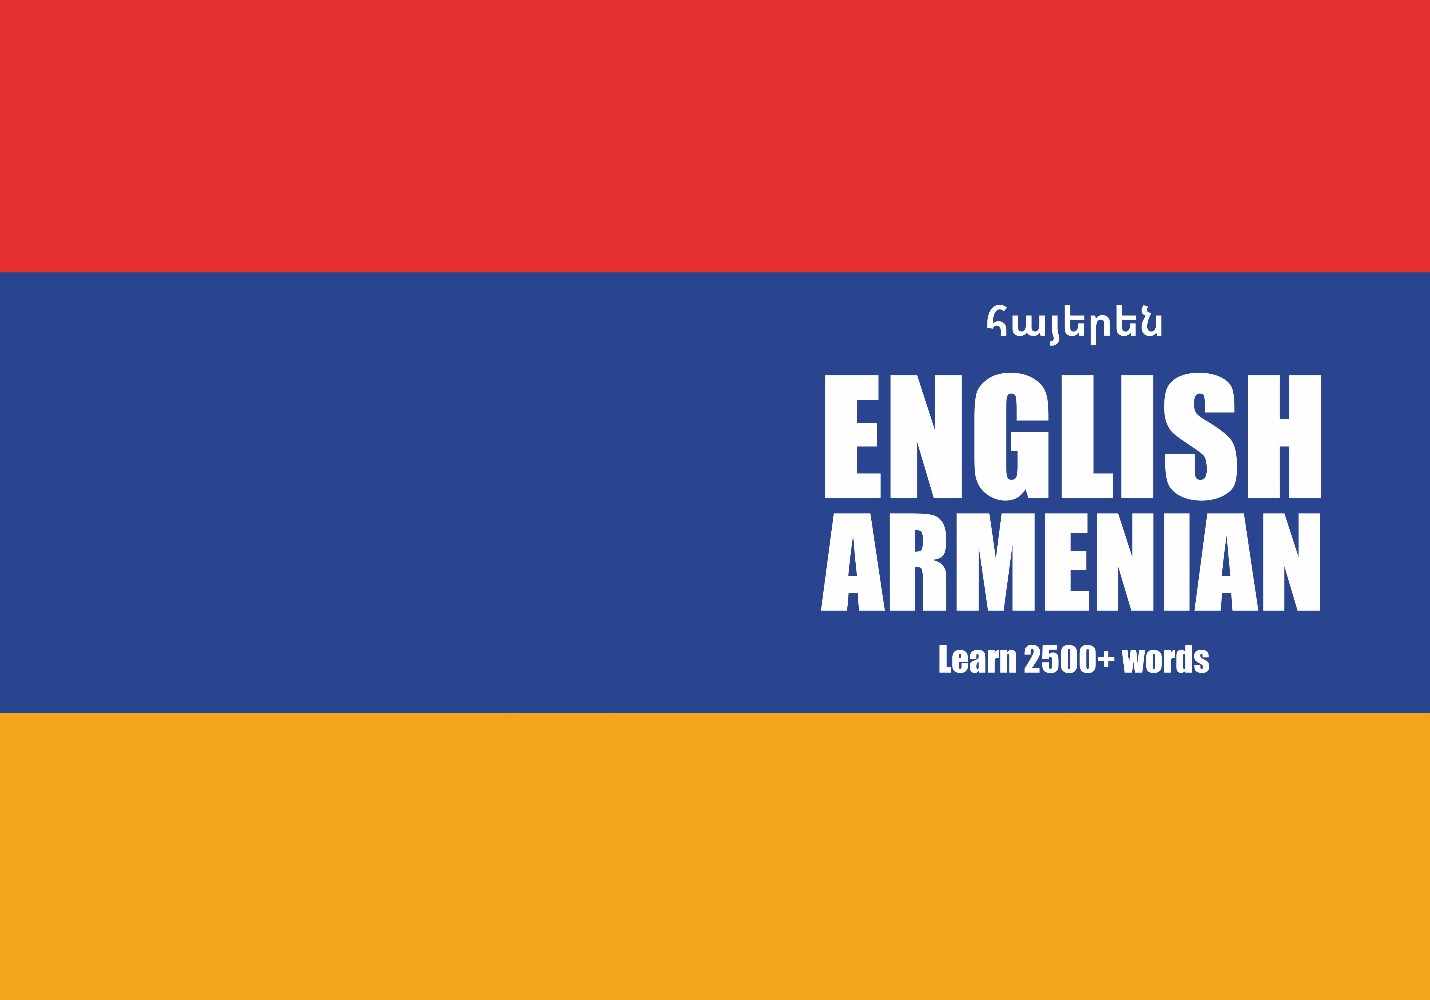 Armenian language learning notebook cover